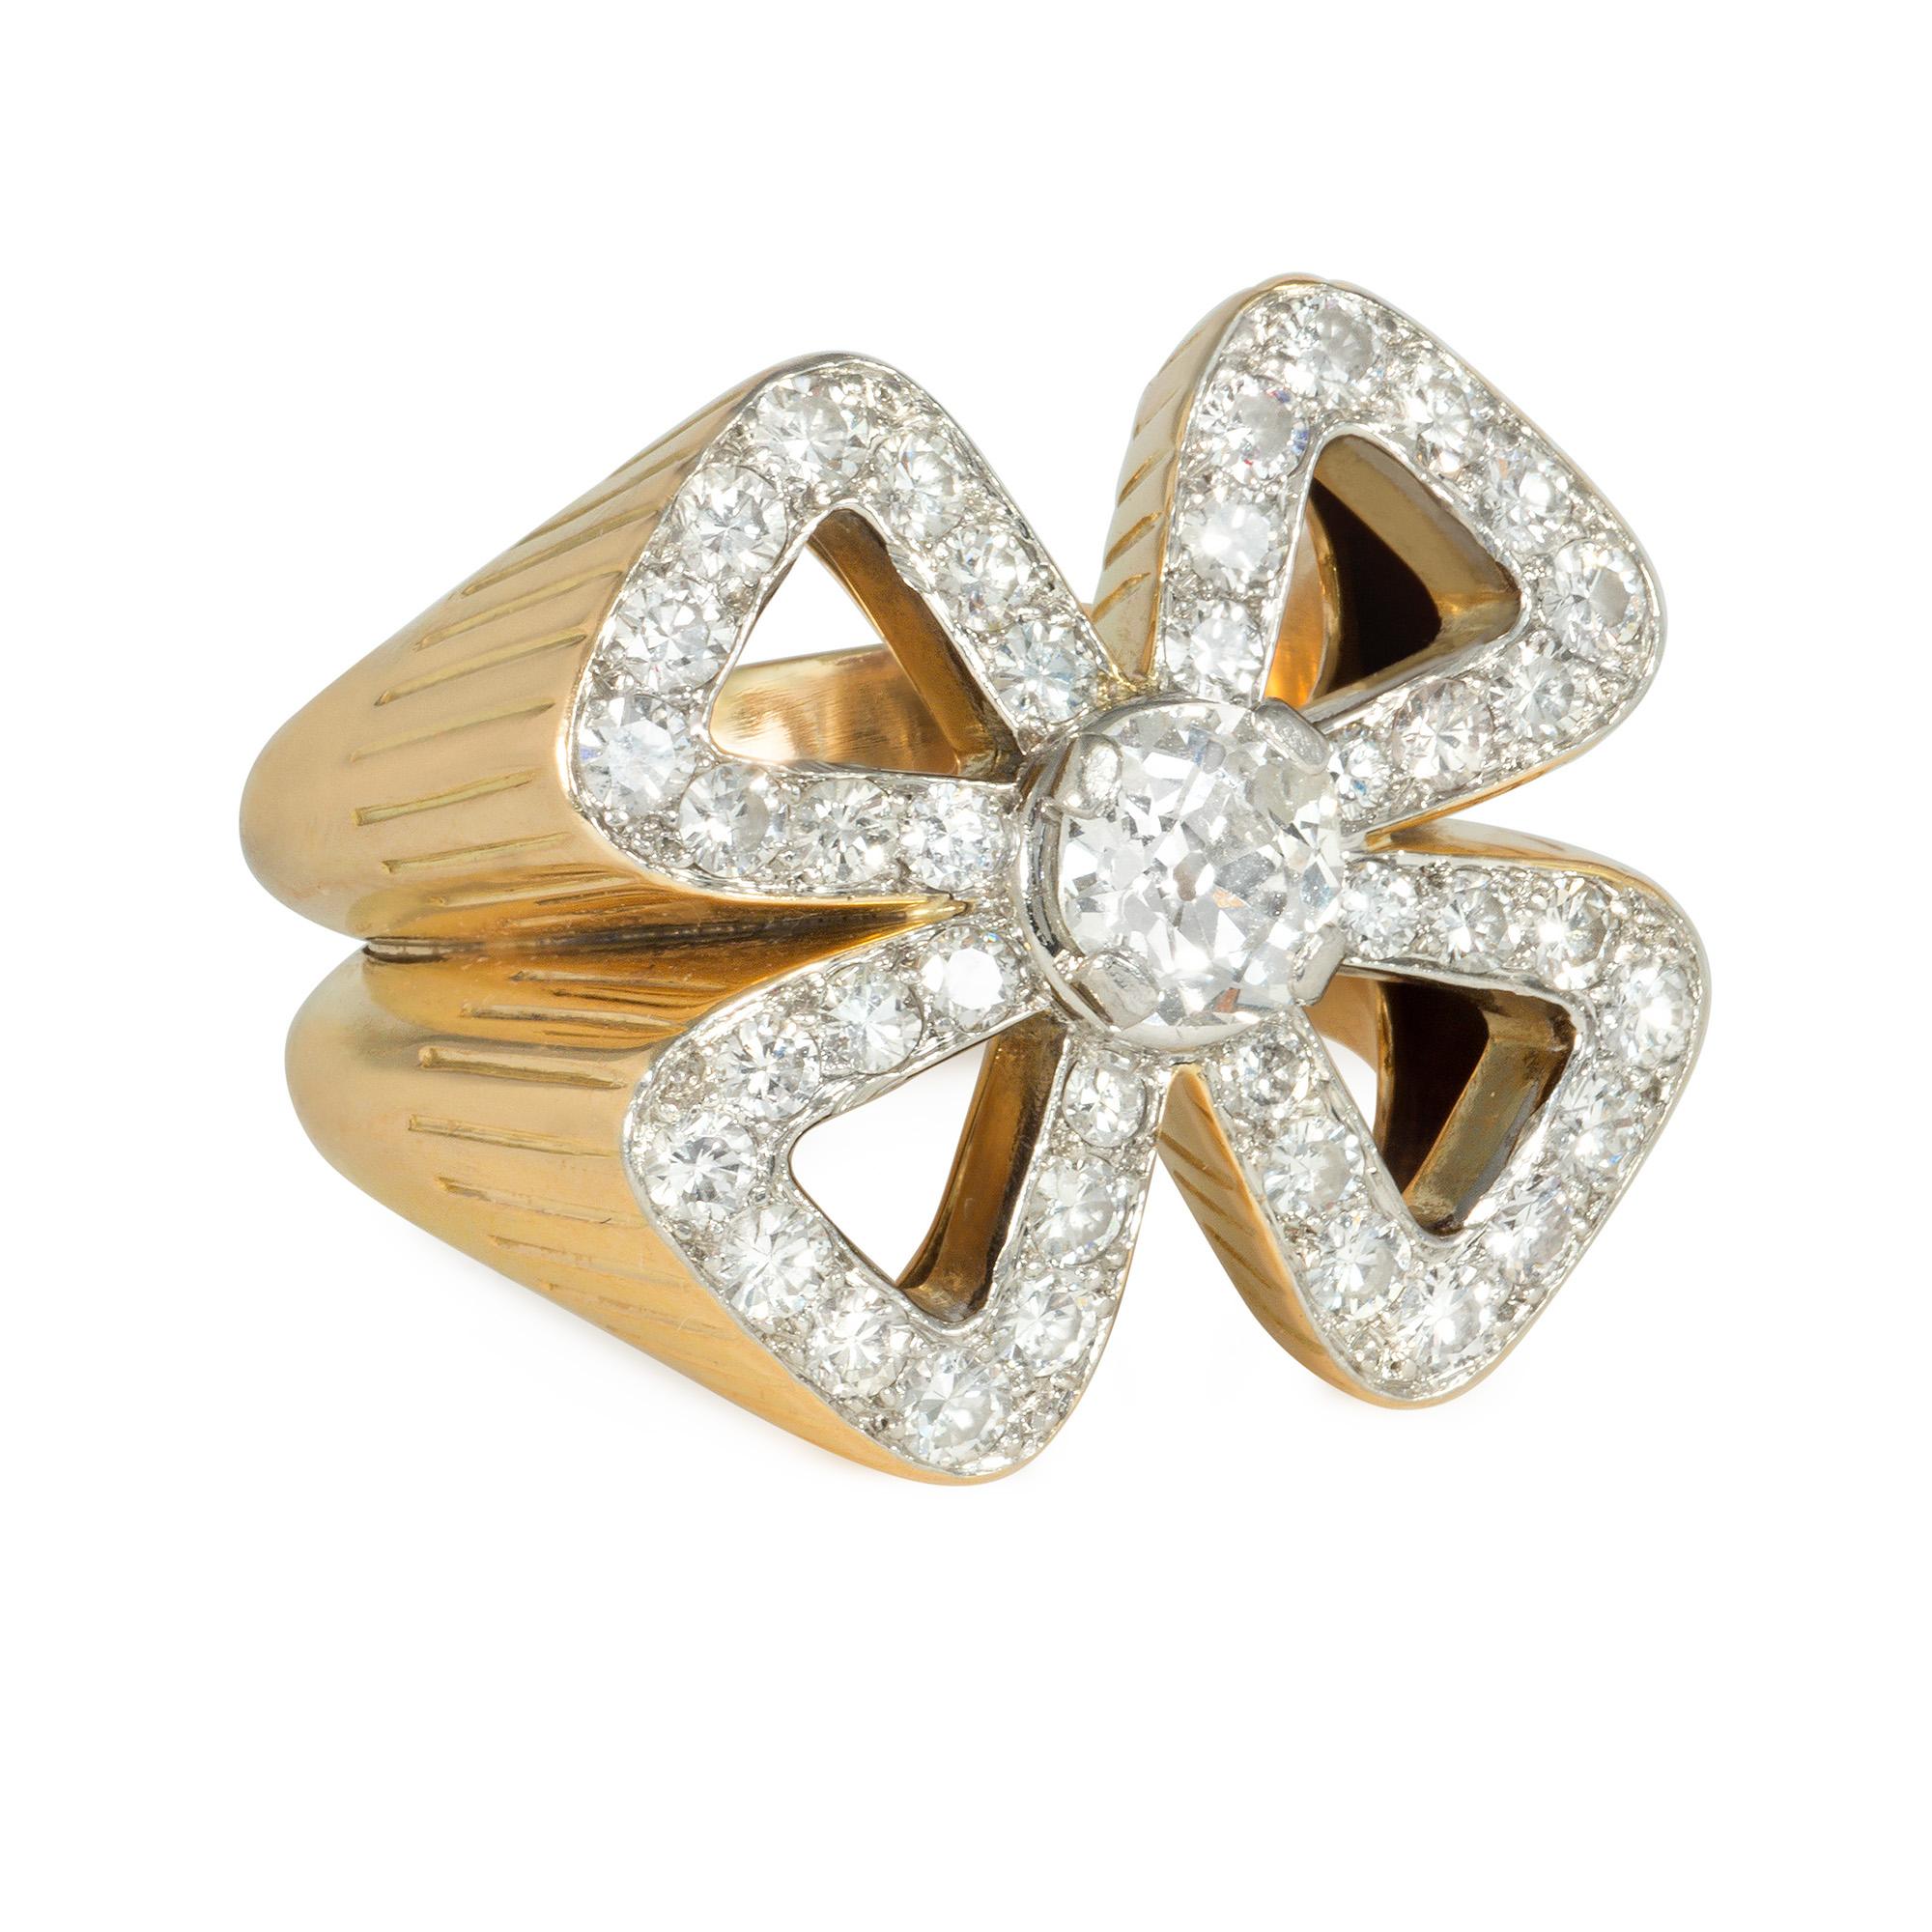 A mid-century gold and diamond cocktail ring, the diamond-set top designed as a stylized openwork quatrefoil or four-leaf clover, centering on a cushion-cut diamond, in 18k with a reeded pattern on the mount.  France.  Atw 2.49 cts. (center diamond